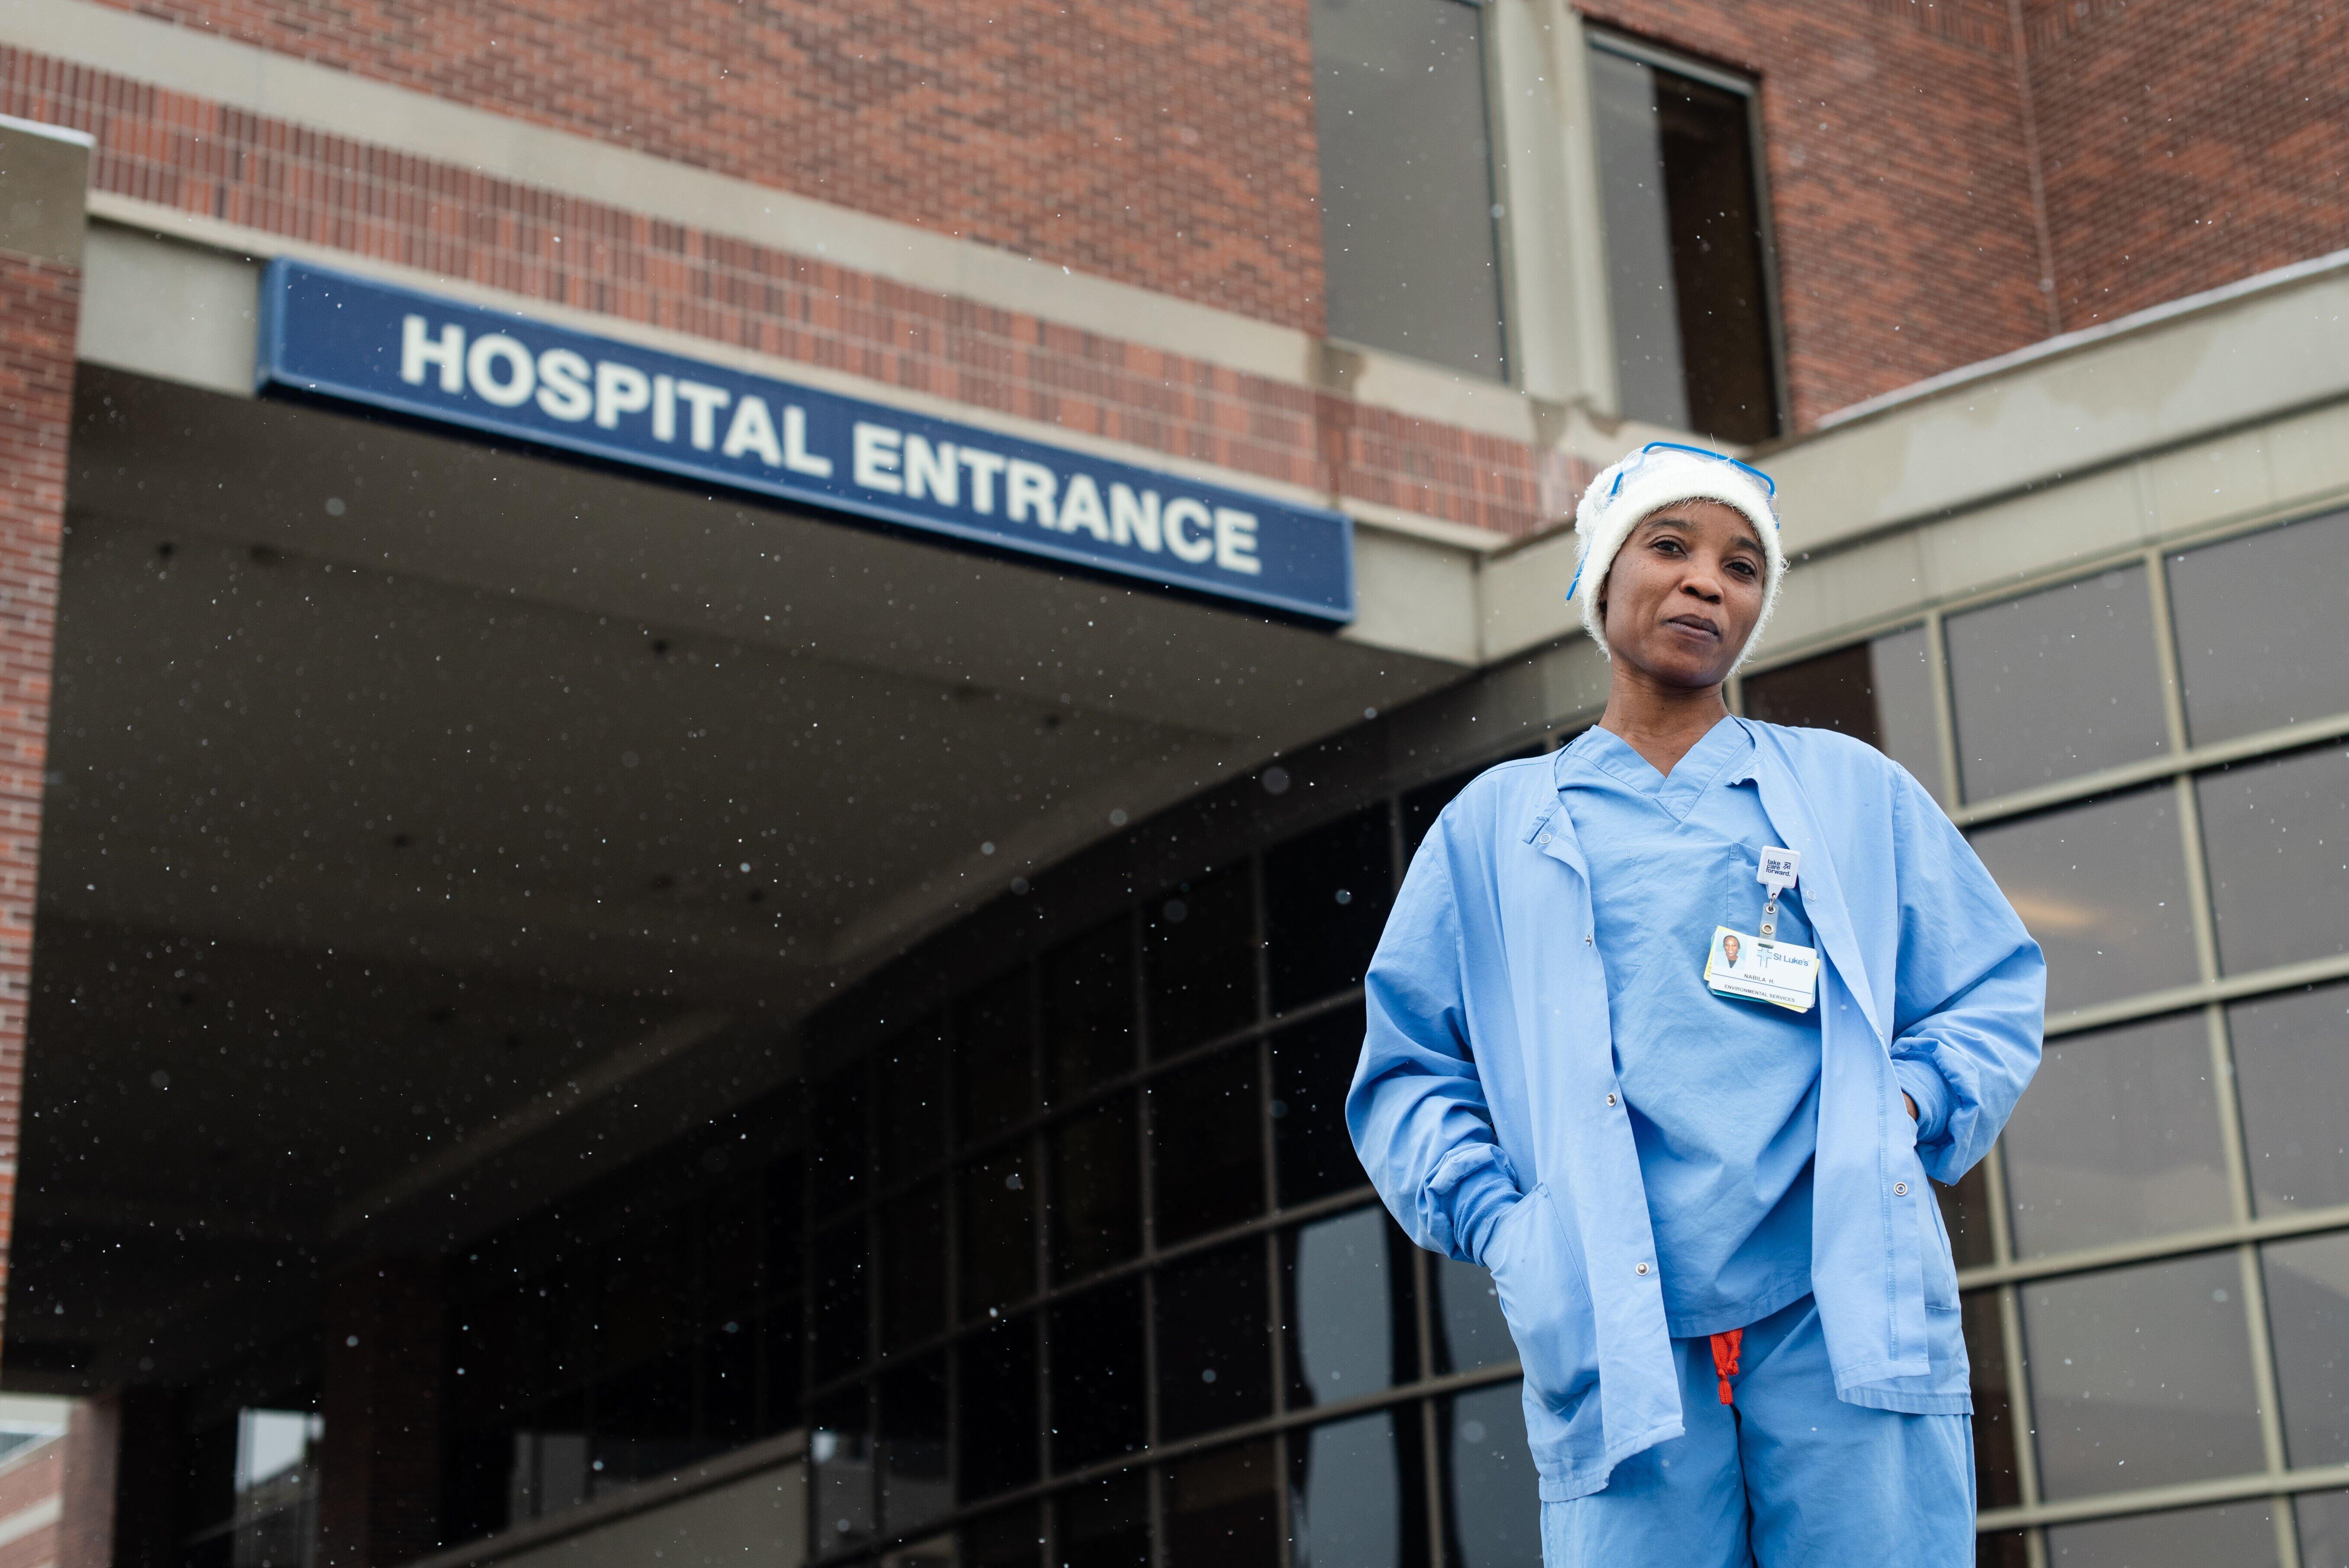 Nabila, an environmental service technician and refugee, in front of the hospital where she works